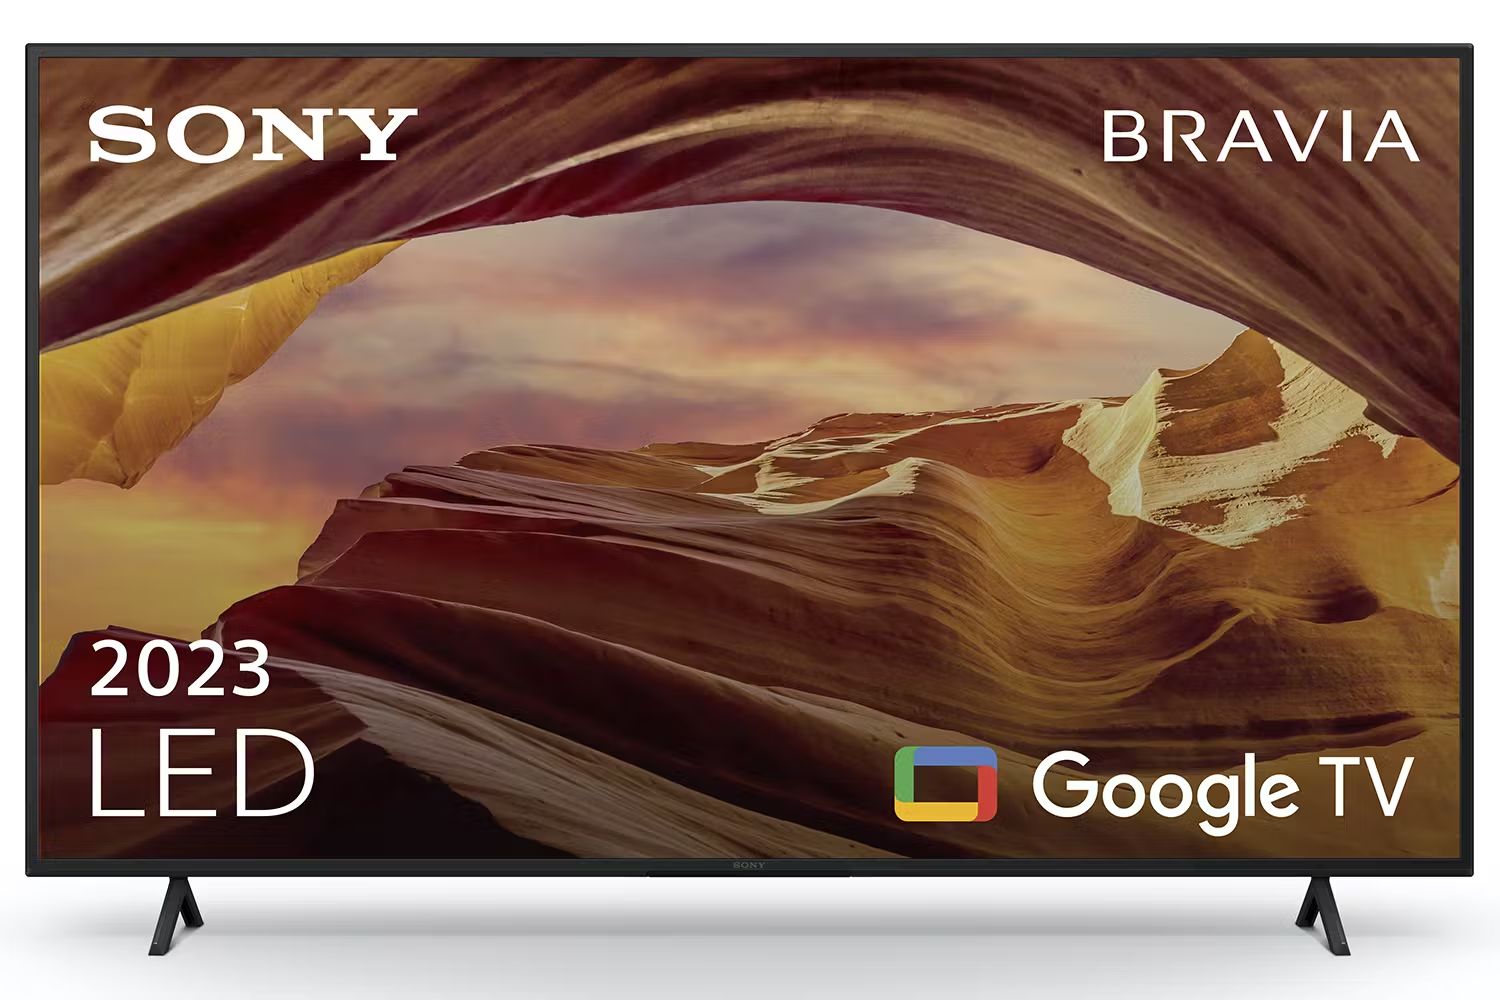 how-to-cast-war-wings-app-to-sony-bravia-oled-tv